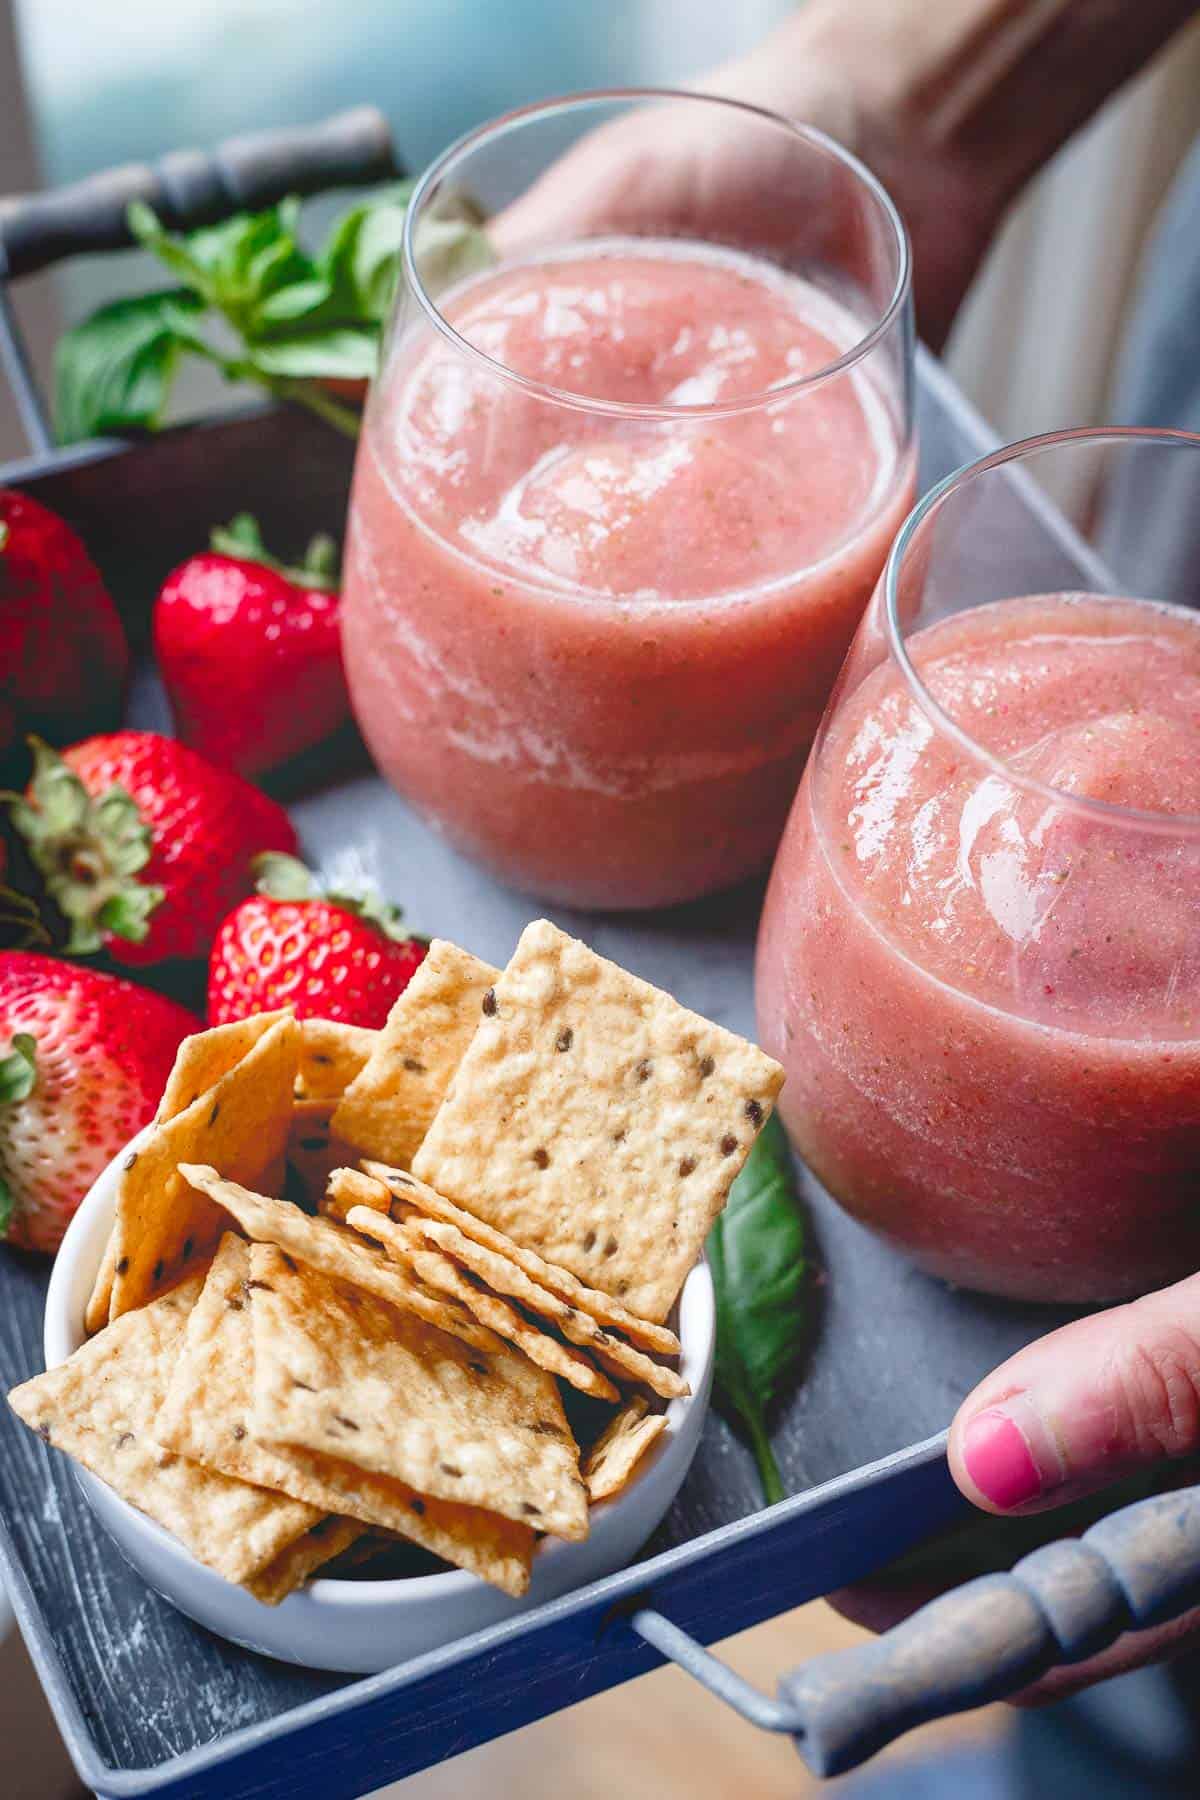 Crunchmaster crackers and easy cider slushies with strawberries and basil make the perfect summer happy hour.